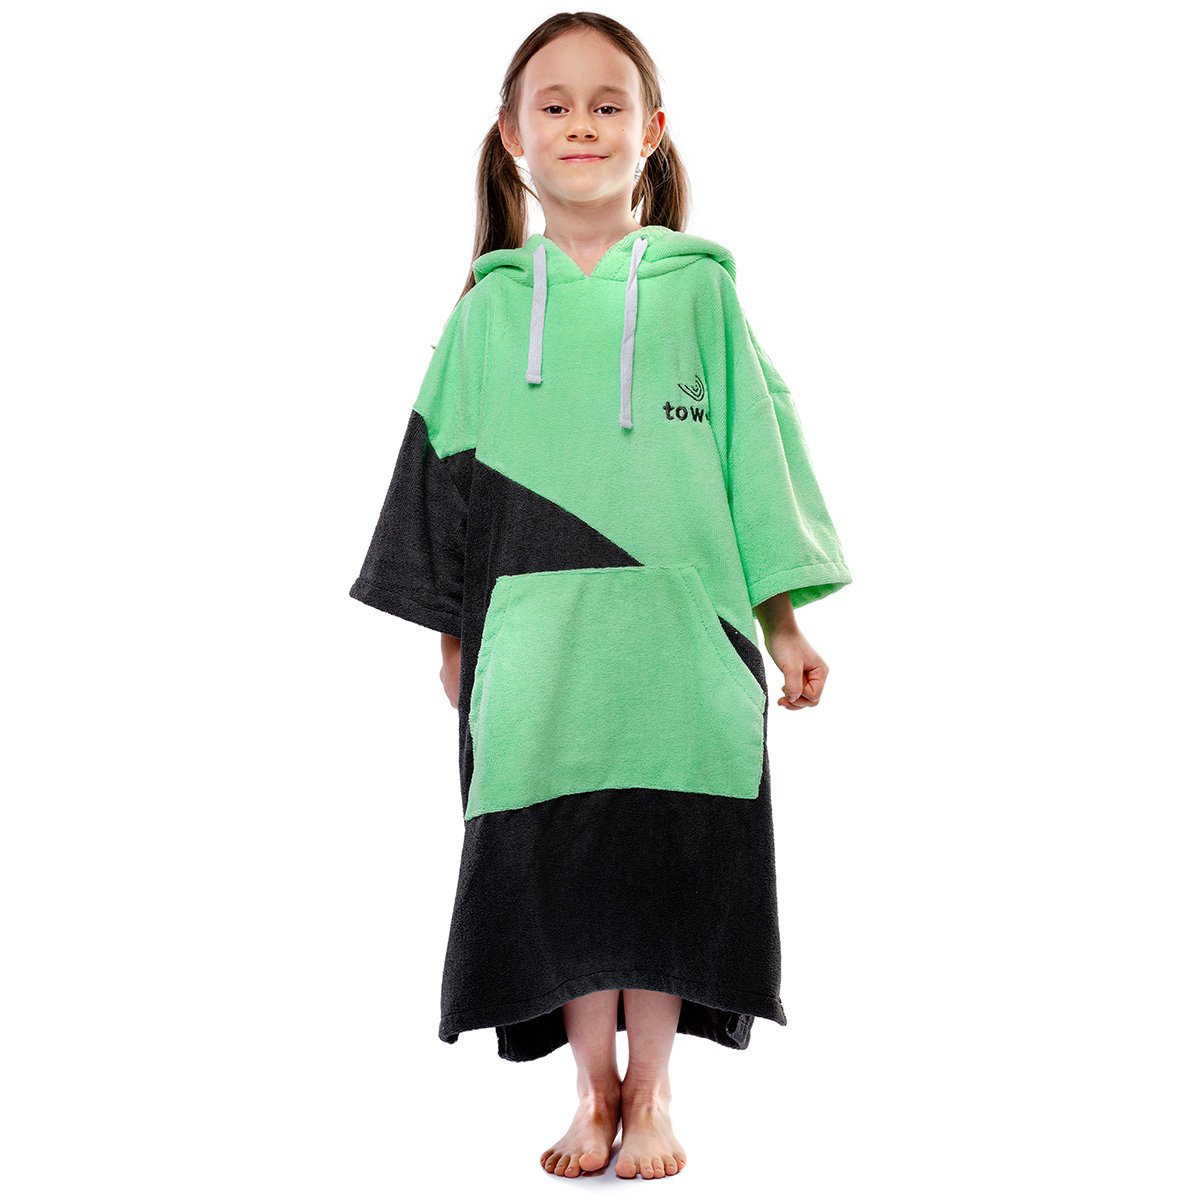 Teenager surf poncho double verde, 60 x 90 cm